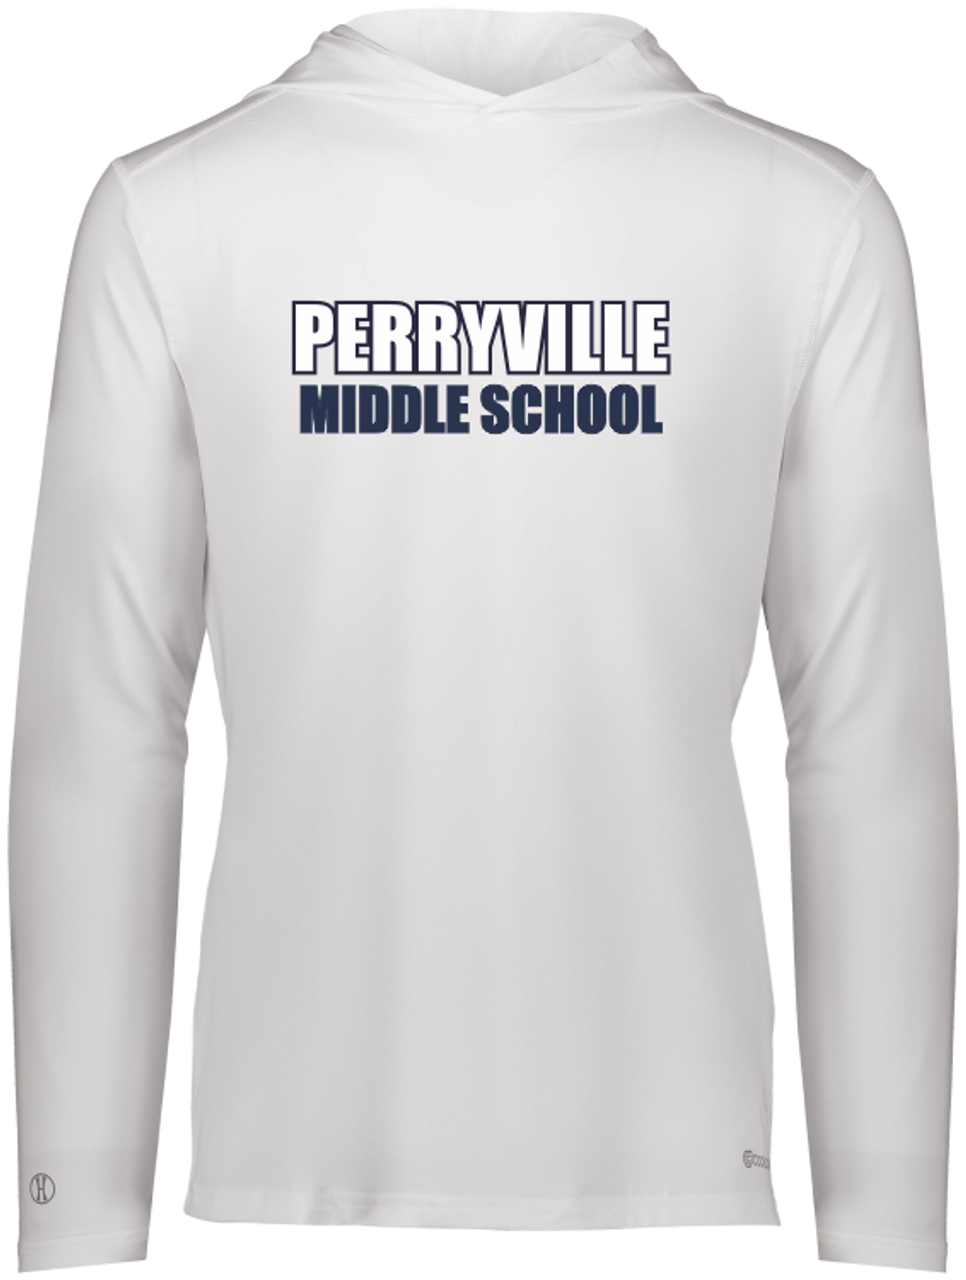 Perryville MS Hooded LS Performance Tee, White